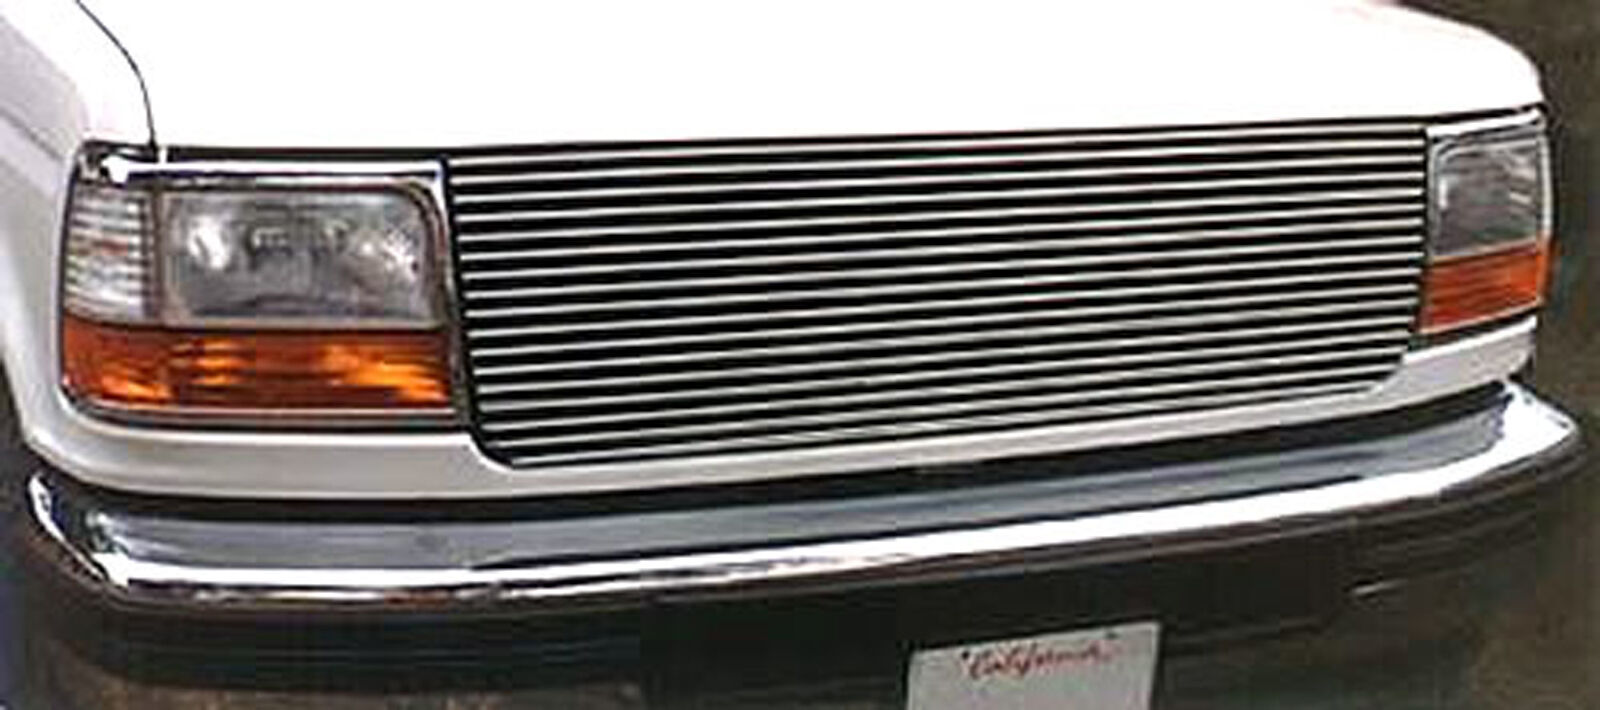 BILLET GRILLE GRILL 92~97 FORD F150 BRONCO F-250 F350 93 94 95 96 Insert